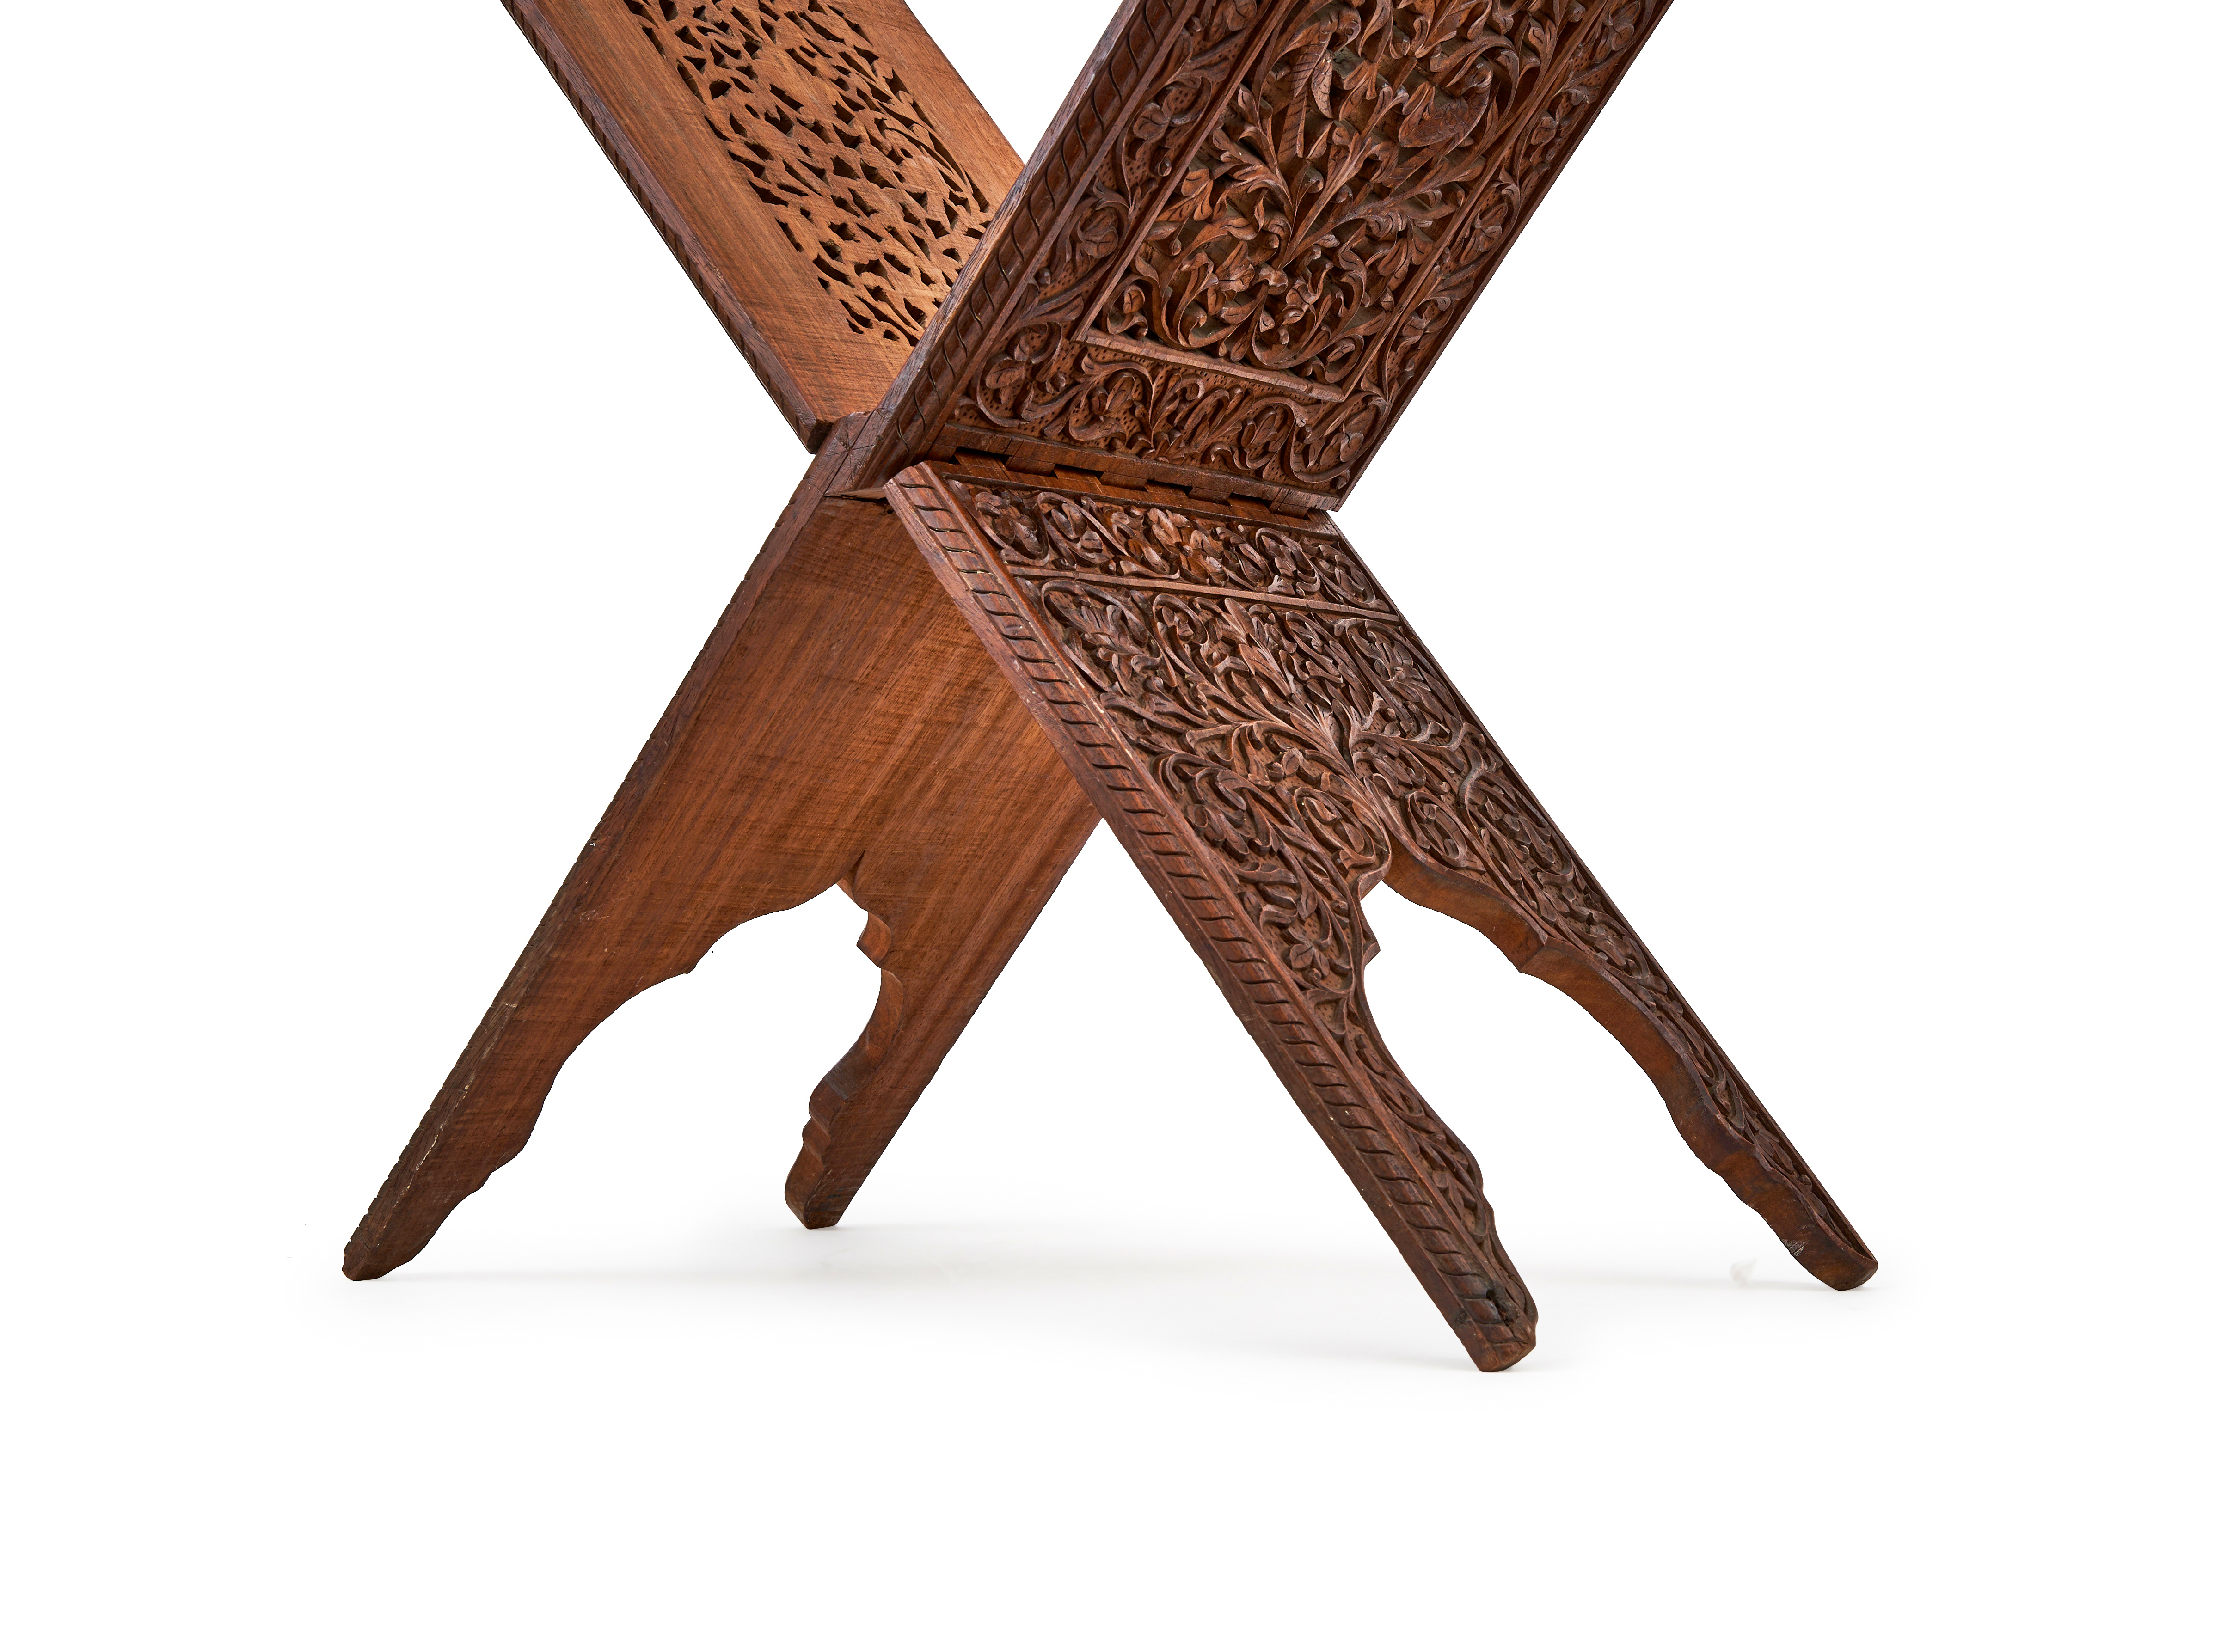 A WOODEN QURAN STAND, PROBABLY INDIA, 19TH CENTURY - Image 4 of 6